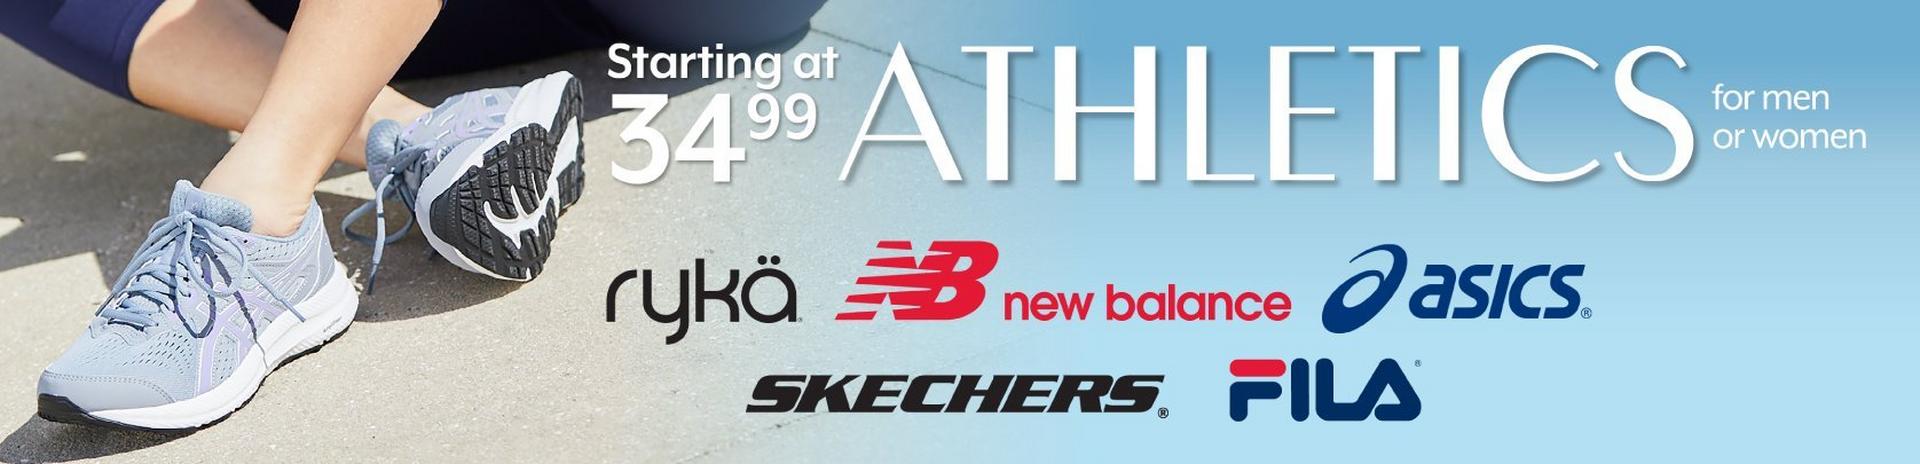 STARTING AT 34.99 Athletics shoes for men & women